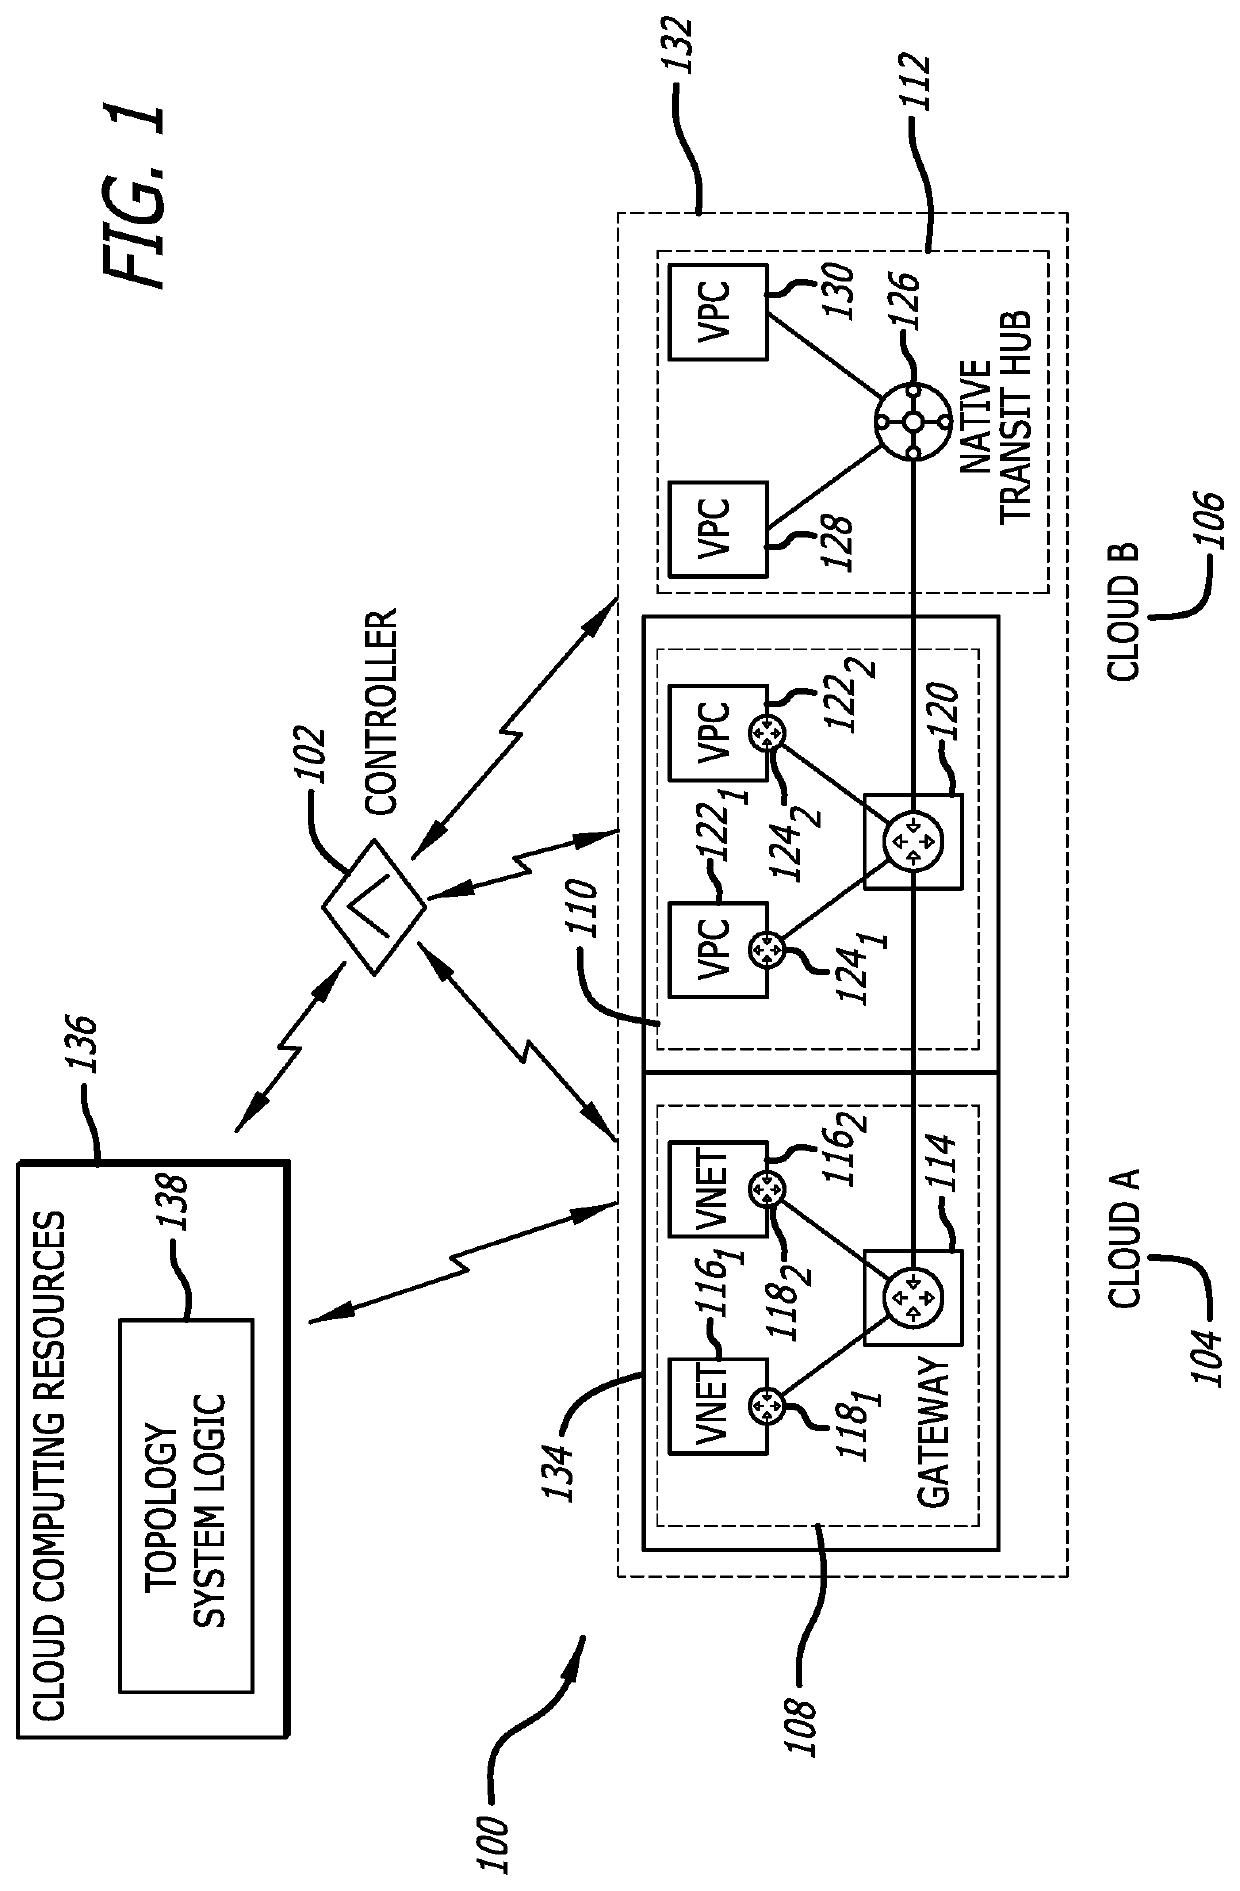 Systems and methods for deploying a cloud management system configured for tagging constructs deployed in a multi-cloud environment